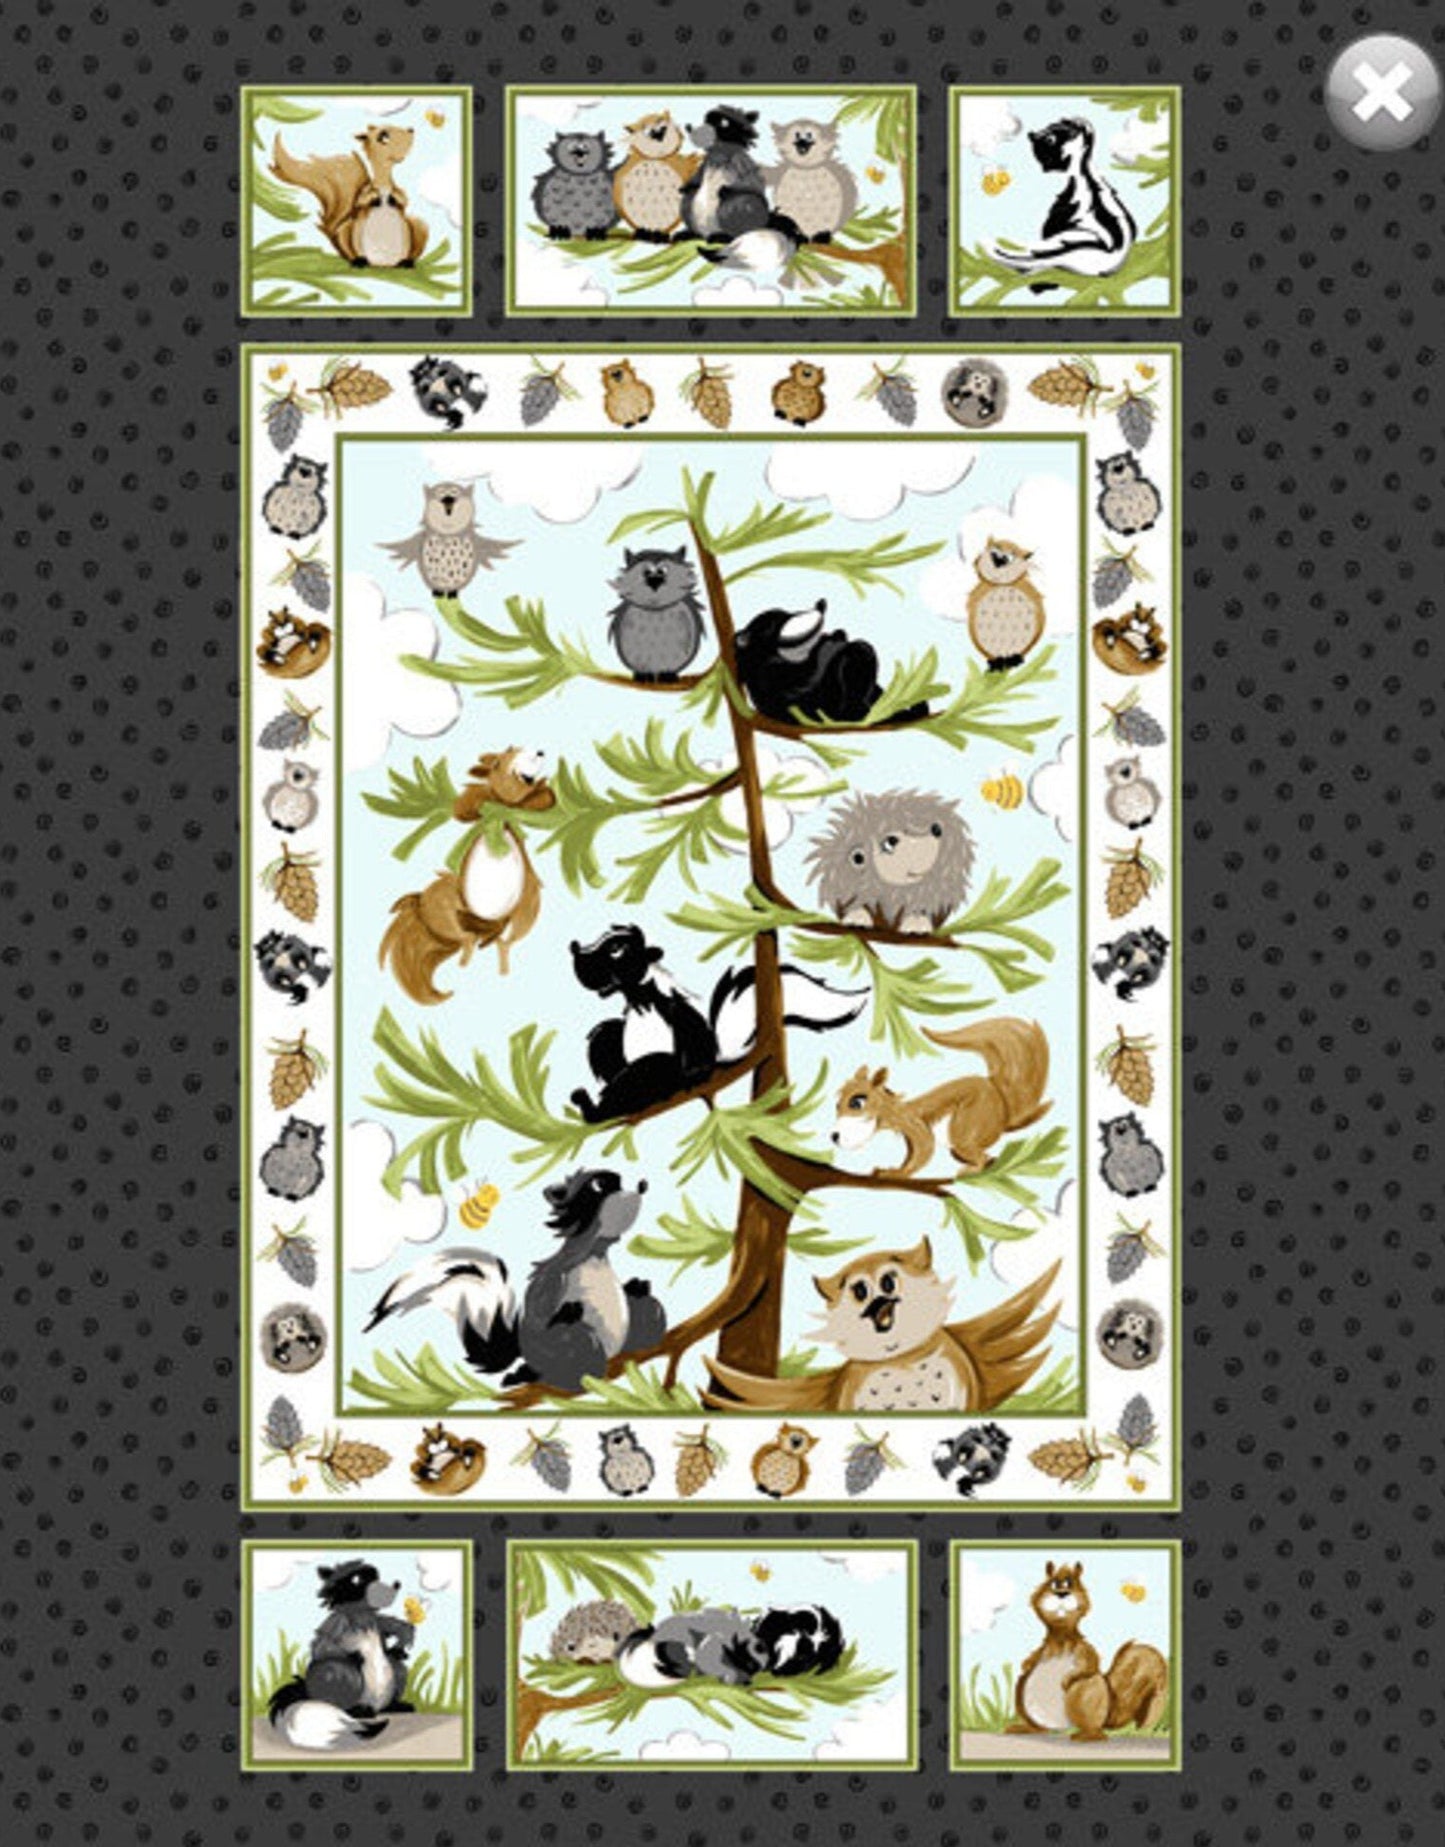 World of Suzybee Fabric Quilt Panel - Woodland Friends